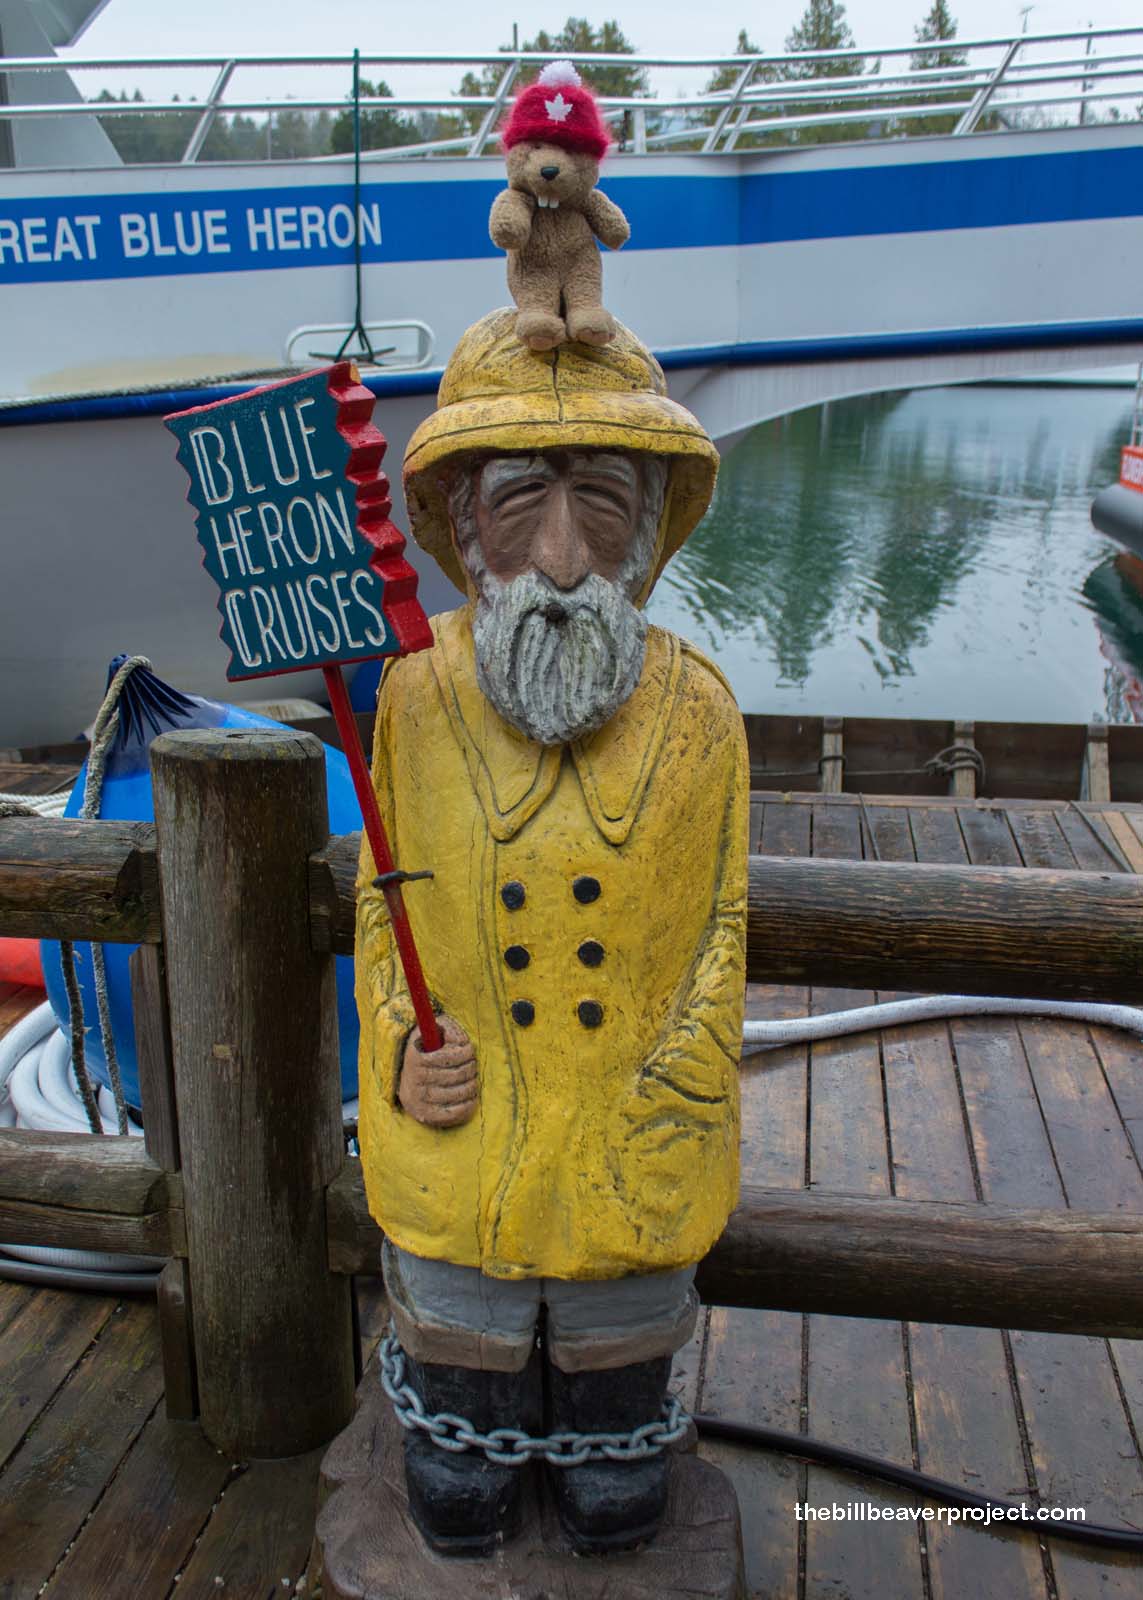 This old sea captain was the starting point of adventure!